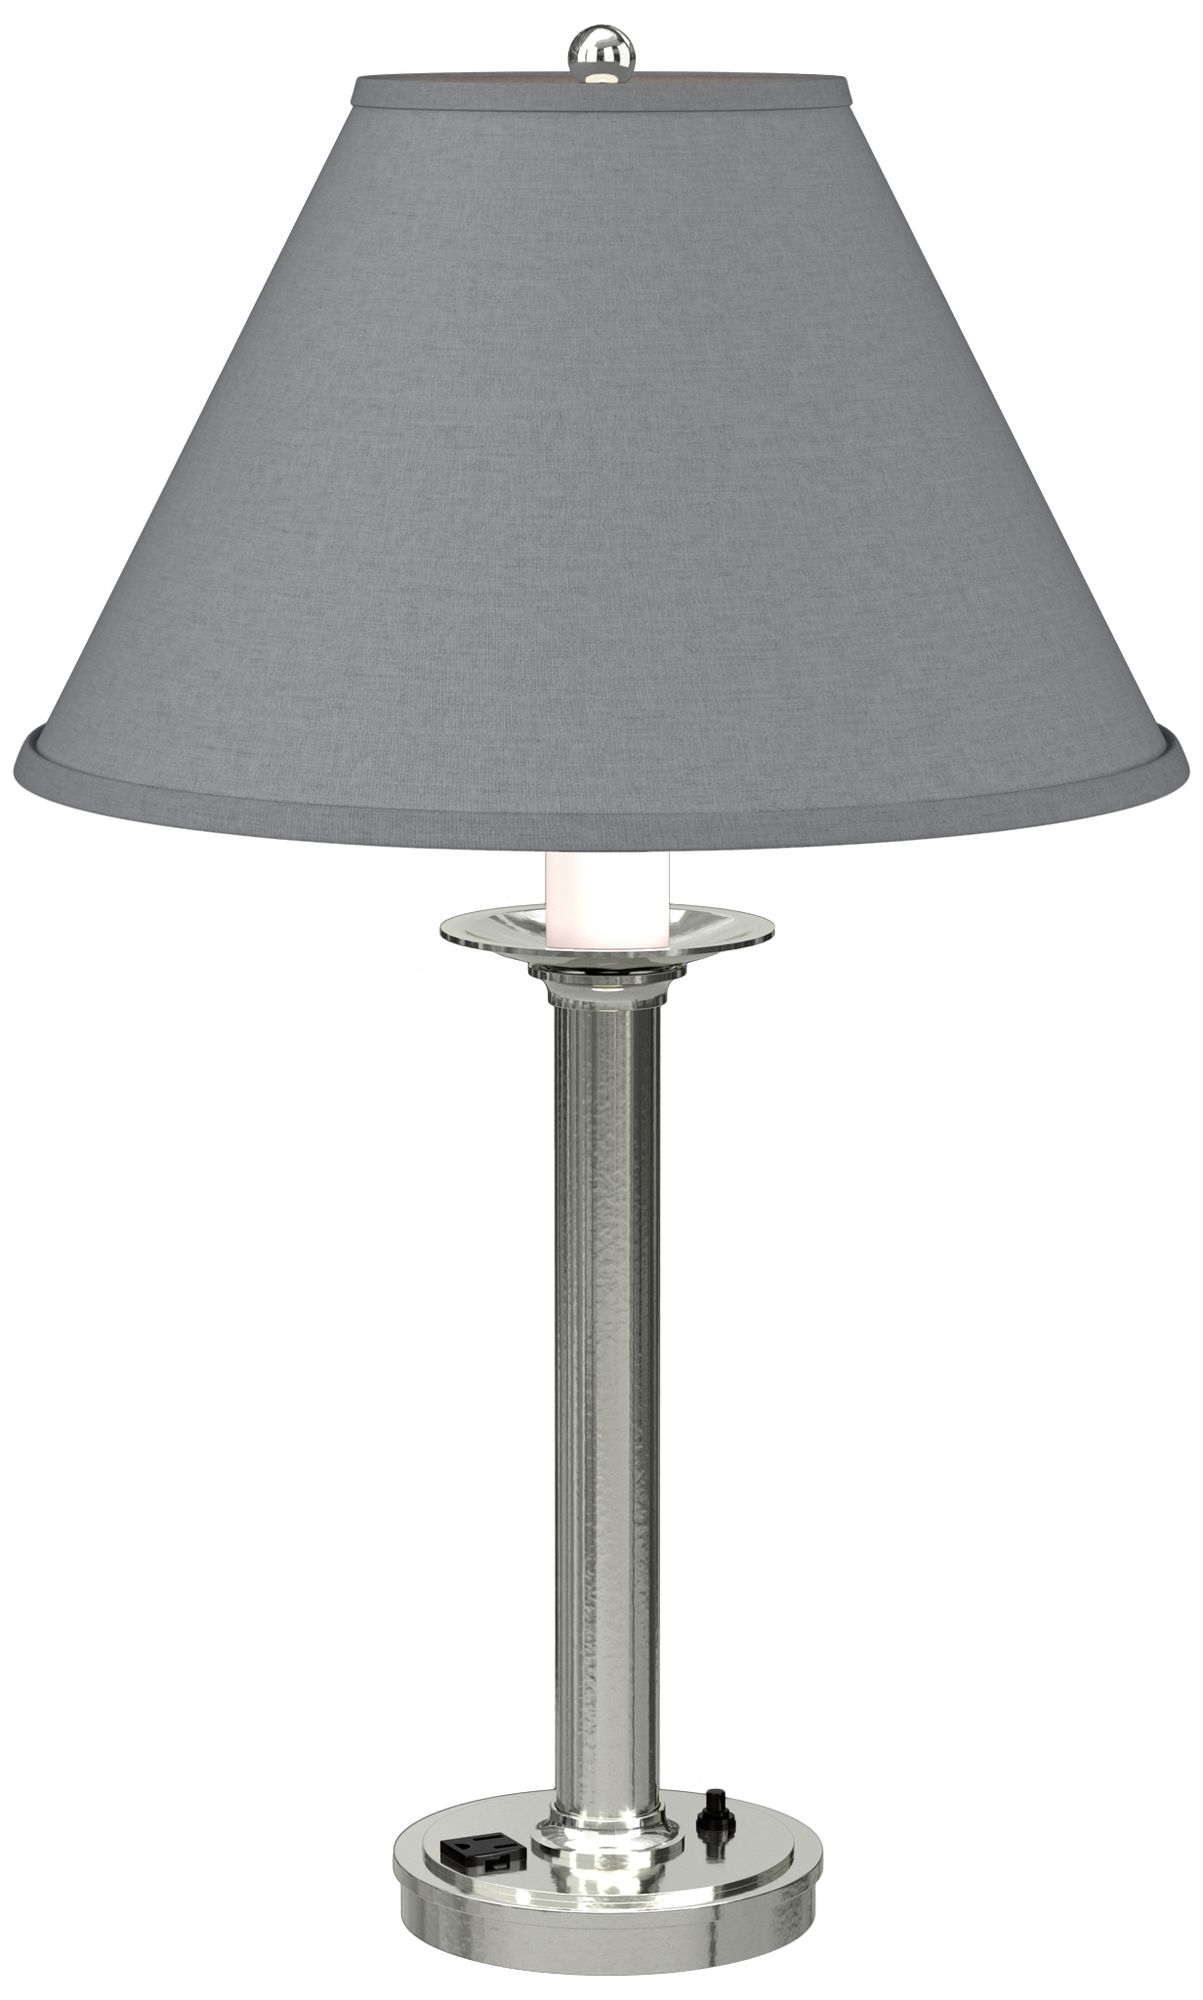 Simple Lines 27" High Sterling Table Lamp With Medium Grey Shade